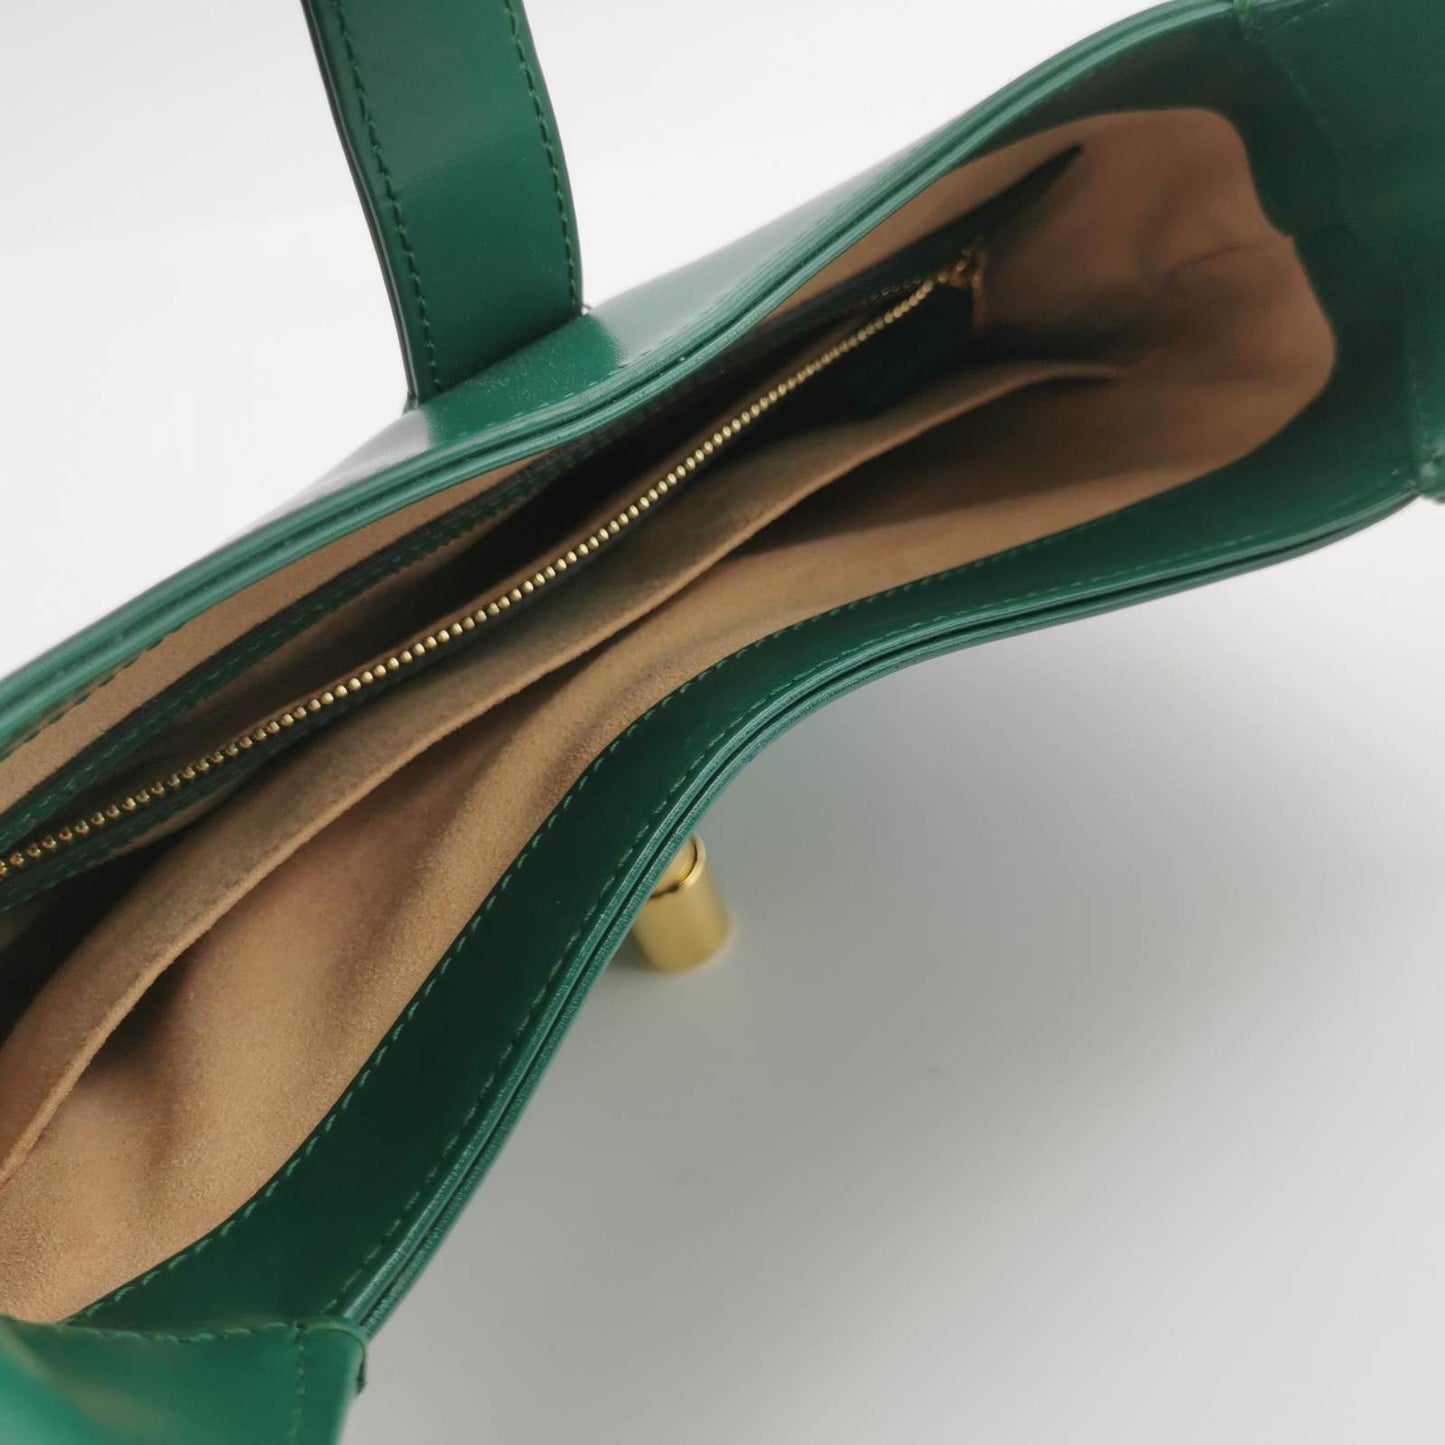 Gucci Jackie 1961 Green Leather Bag Small with Adjustable Strap